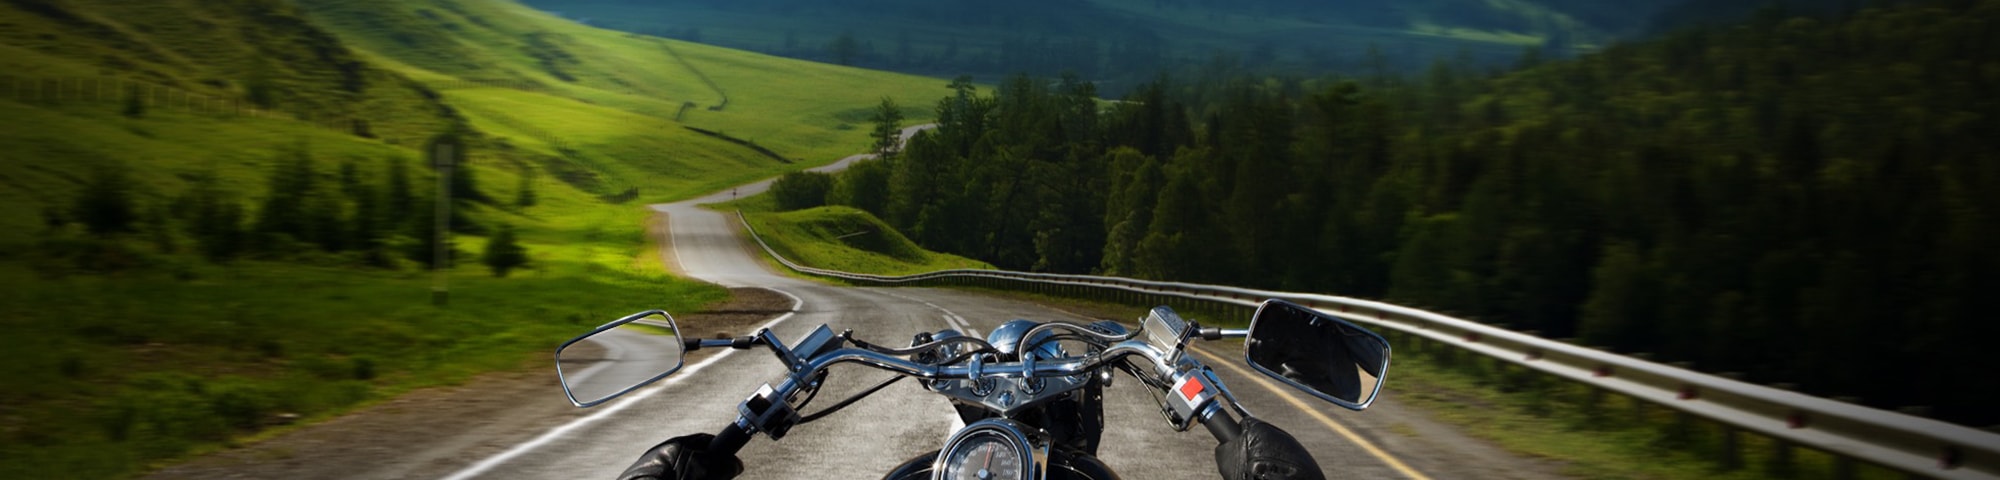 Peake & Fowler - Motorcycle Accident Lawyers